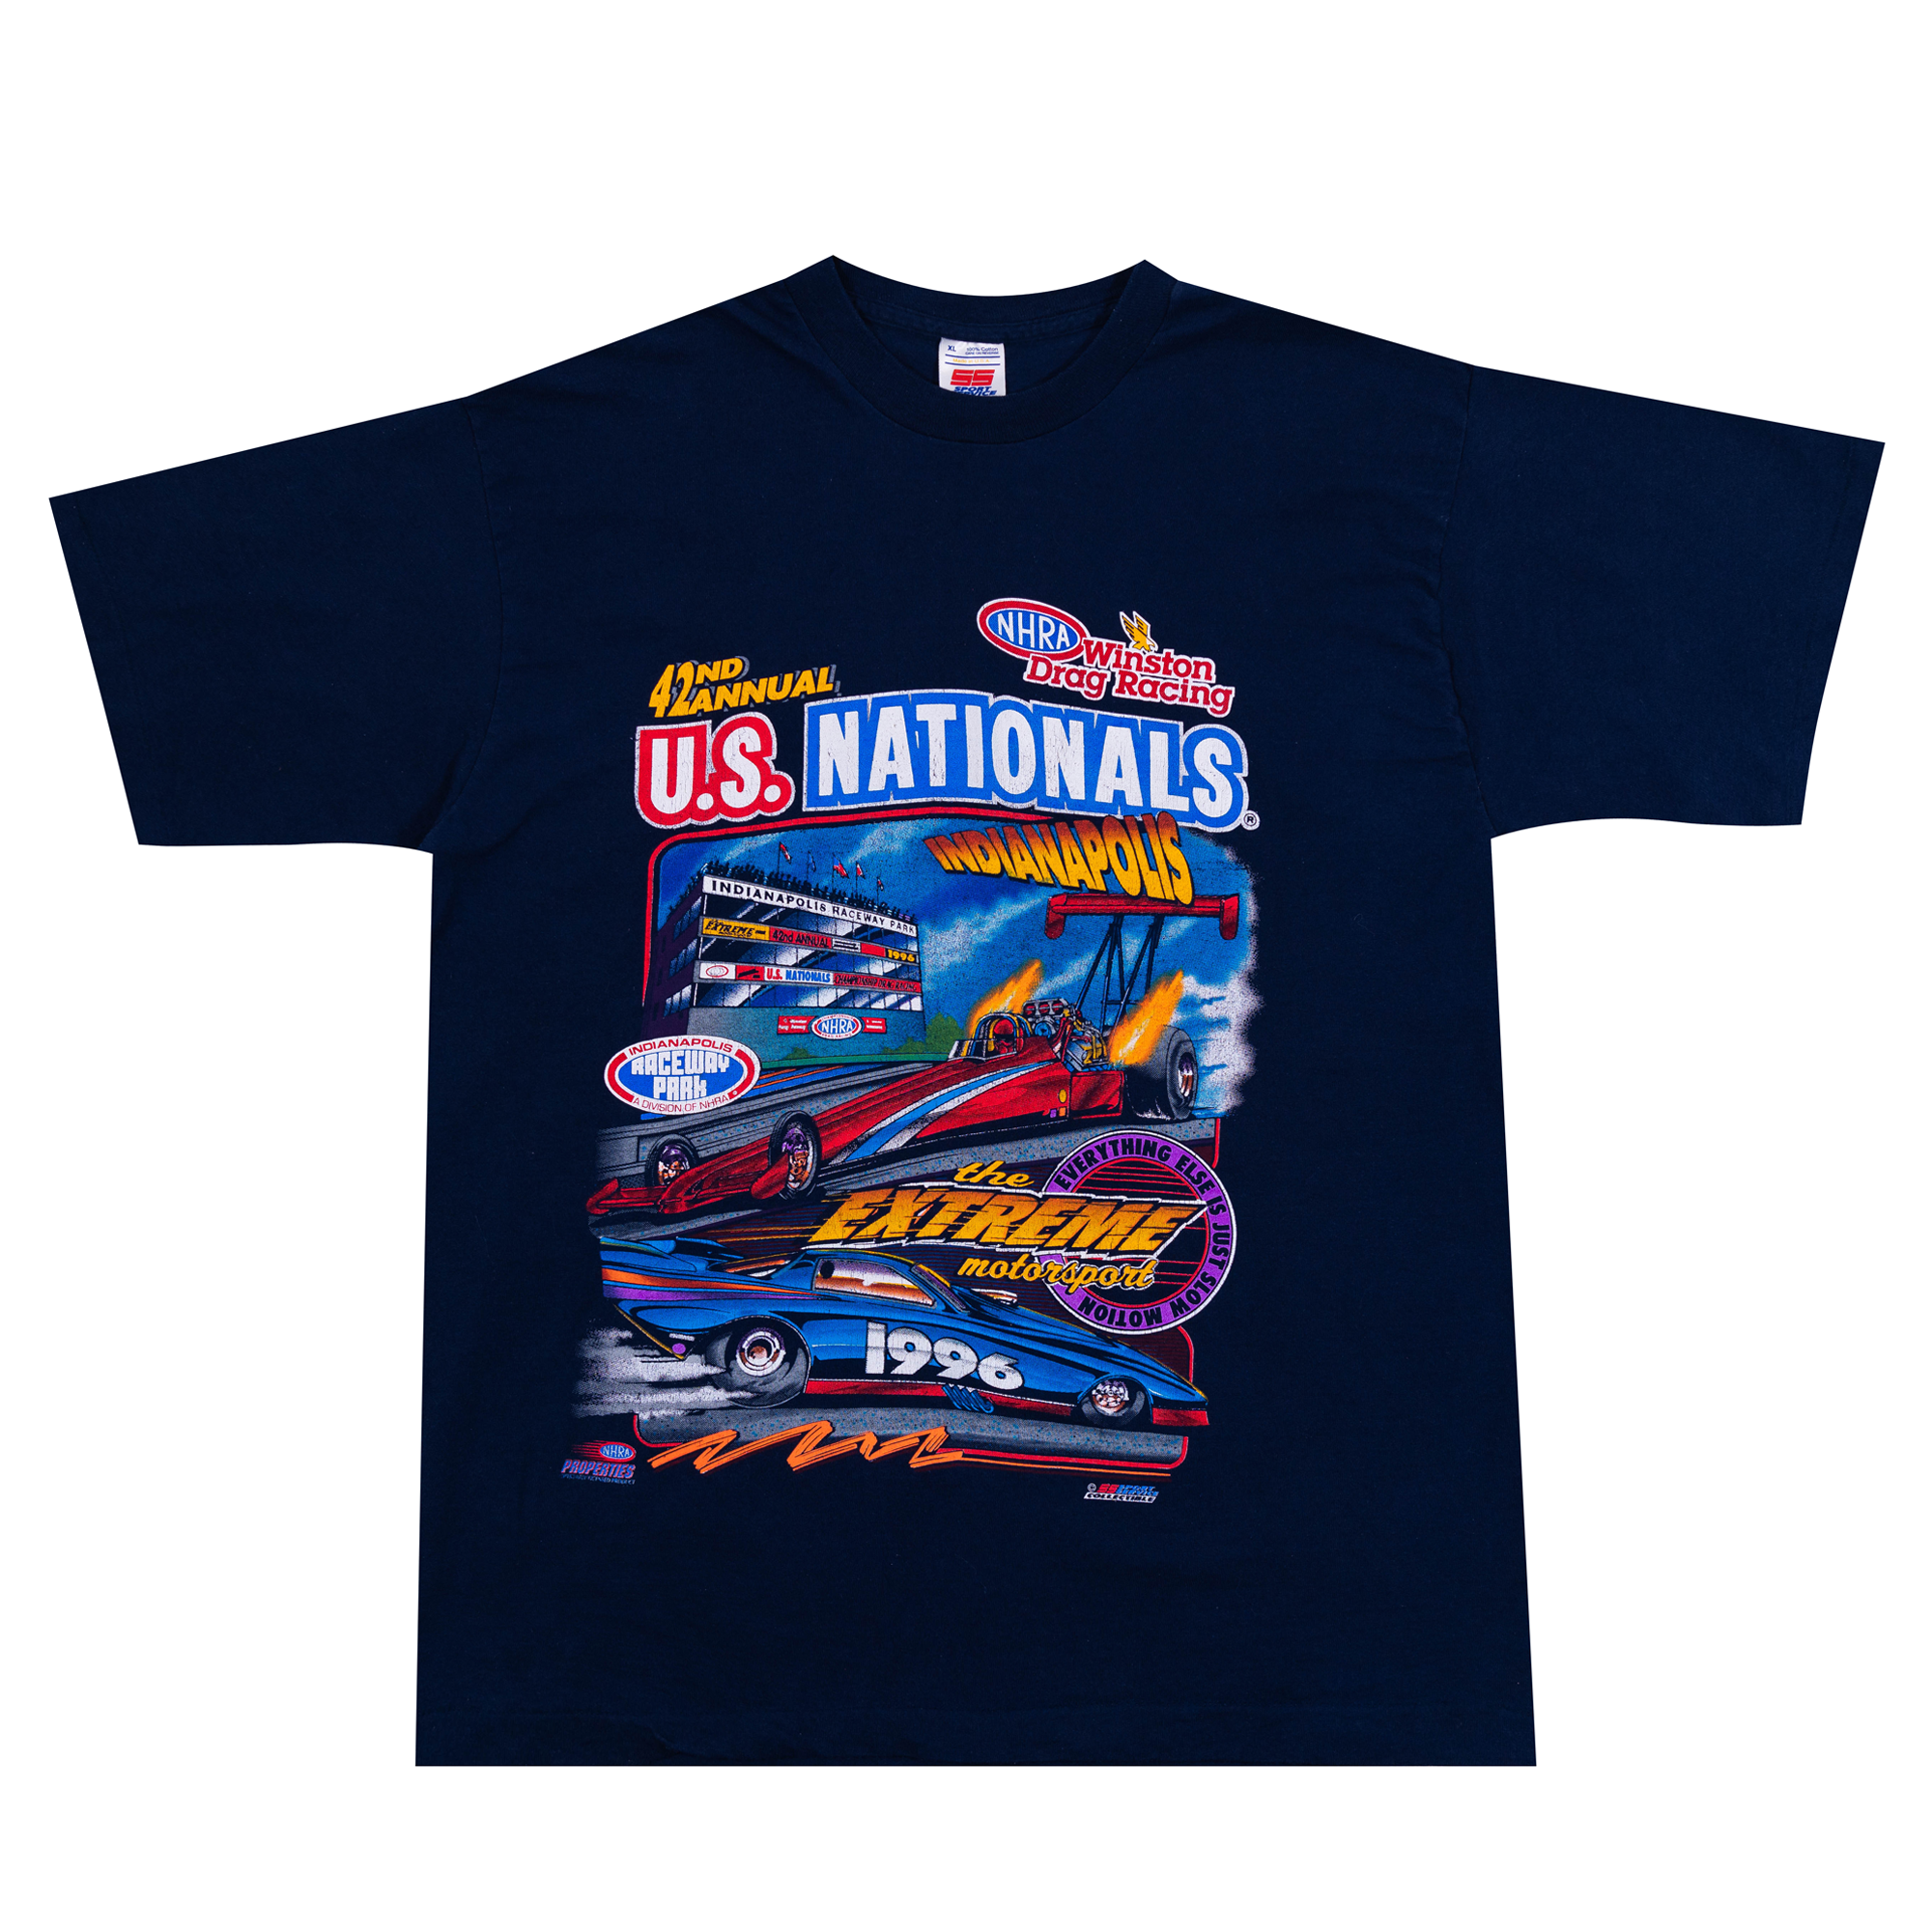 42nd US Nationals Indianapolis 1996 Racing Tee Navy-PLUS